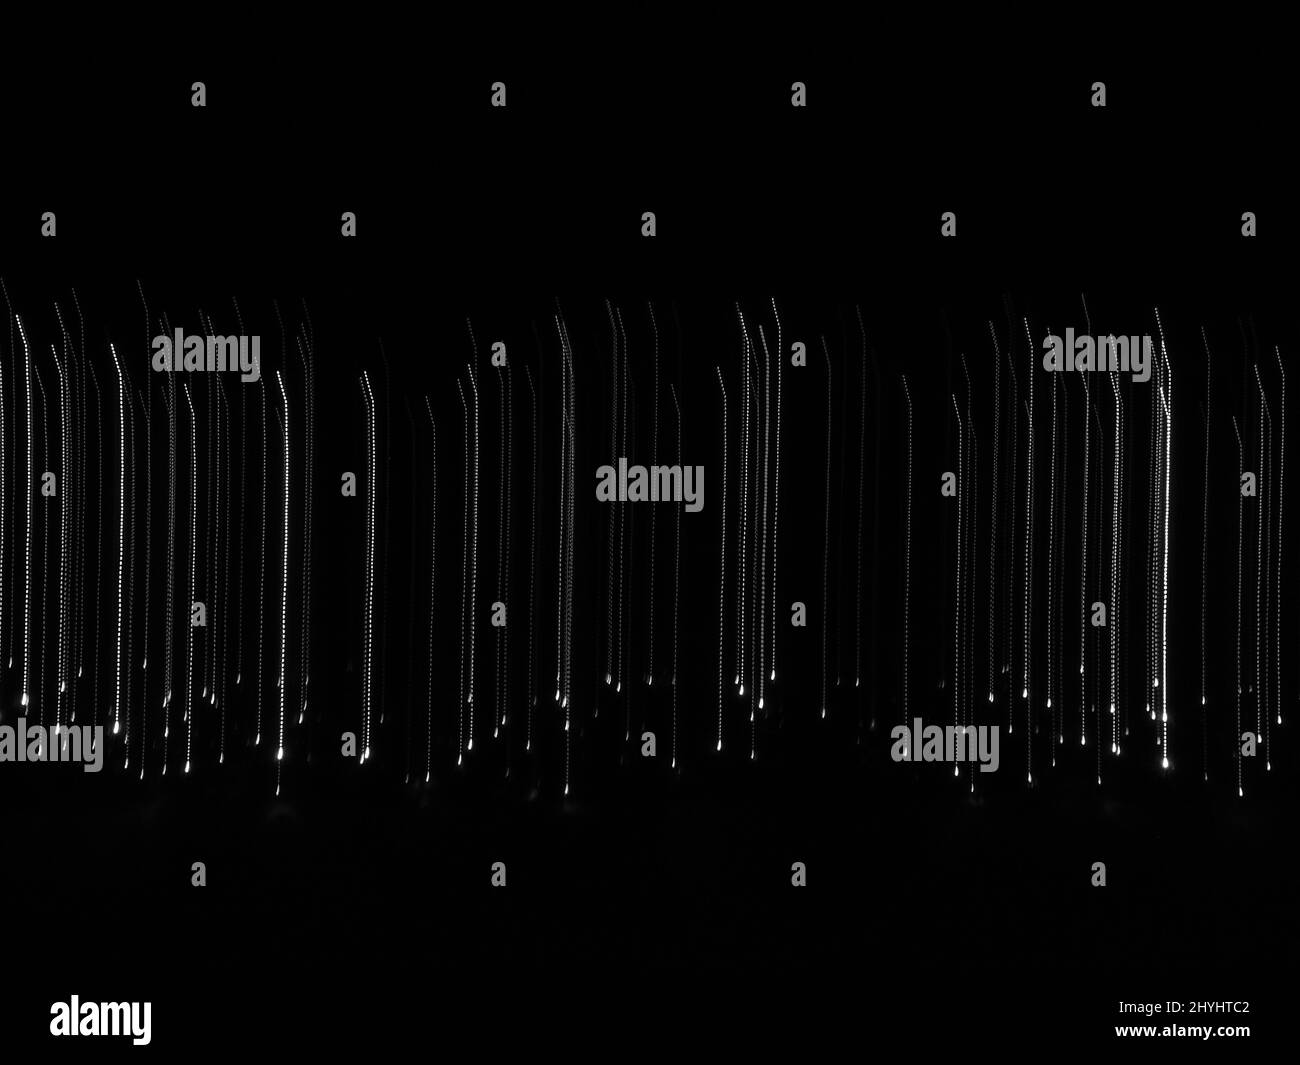 Abstract falling lines background. Many white lights going down on black background representing the concept of fall Stock Photo